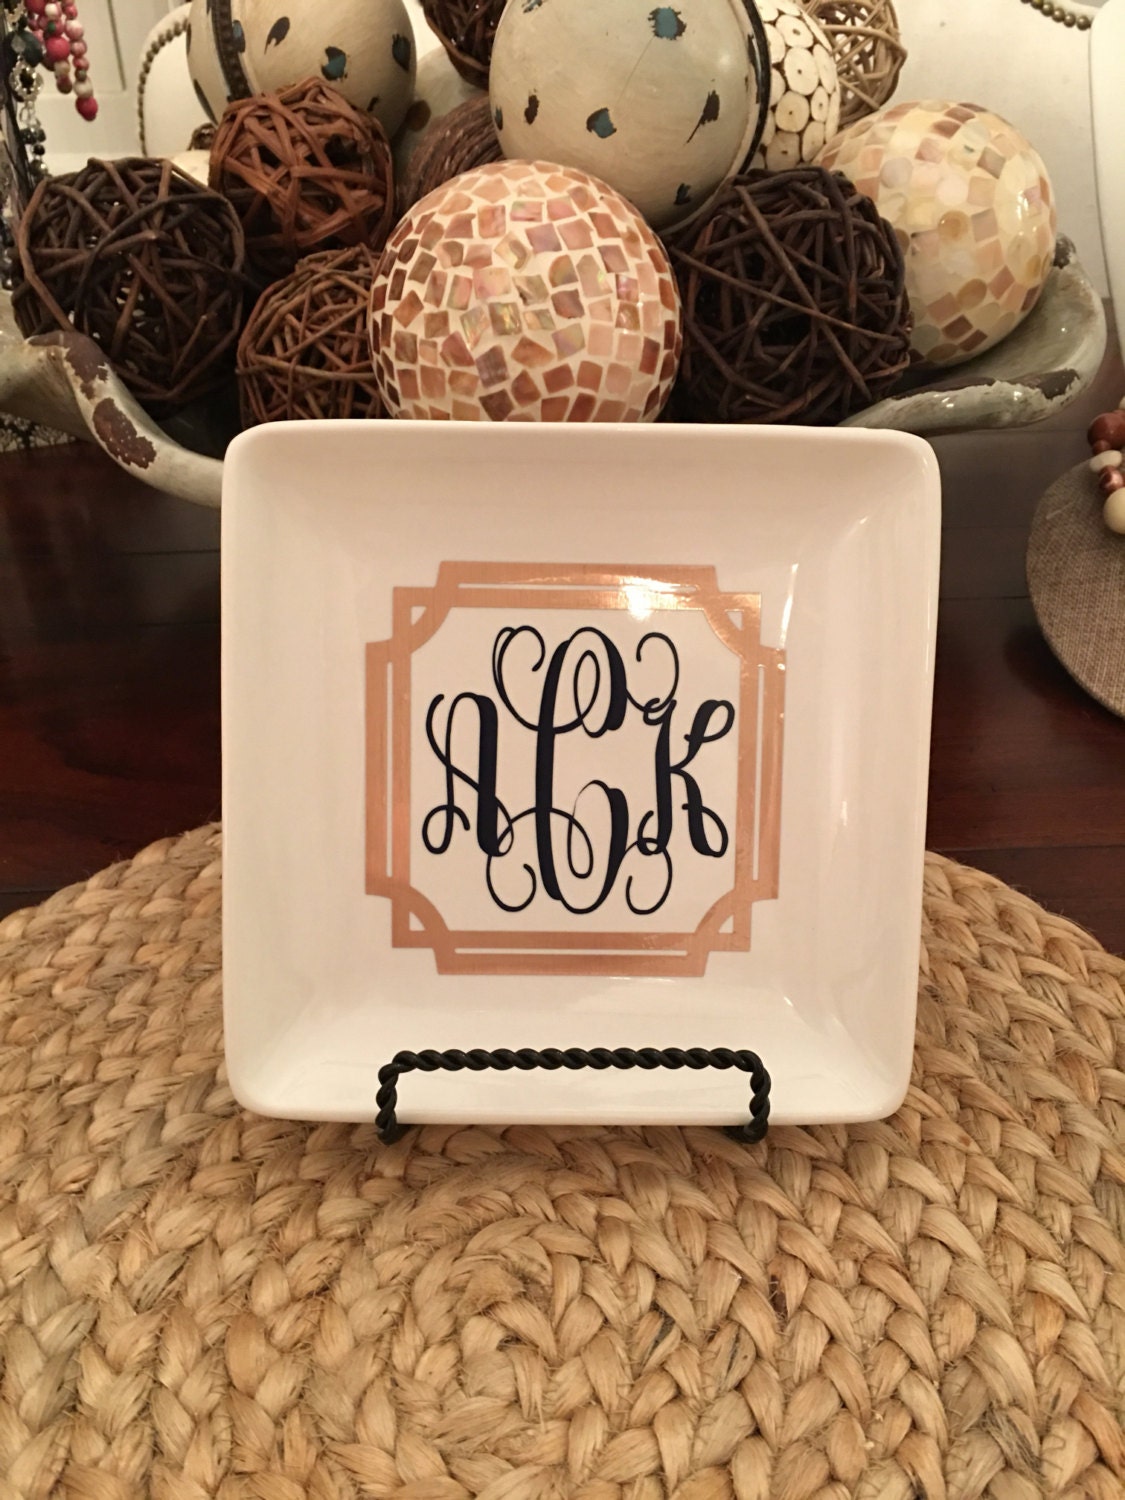 Decorative Monogramed Brown and Blue and othe custom options Porcelain Monogrammed Tray, Jewelry Storage, Jewelry Dish